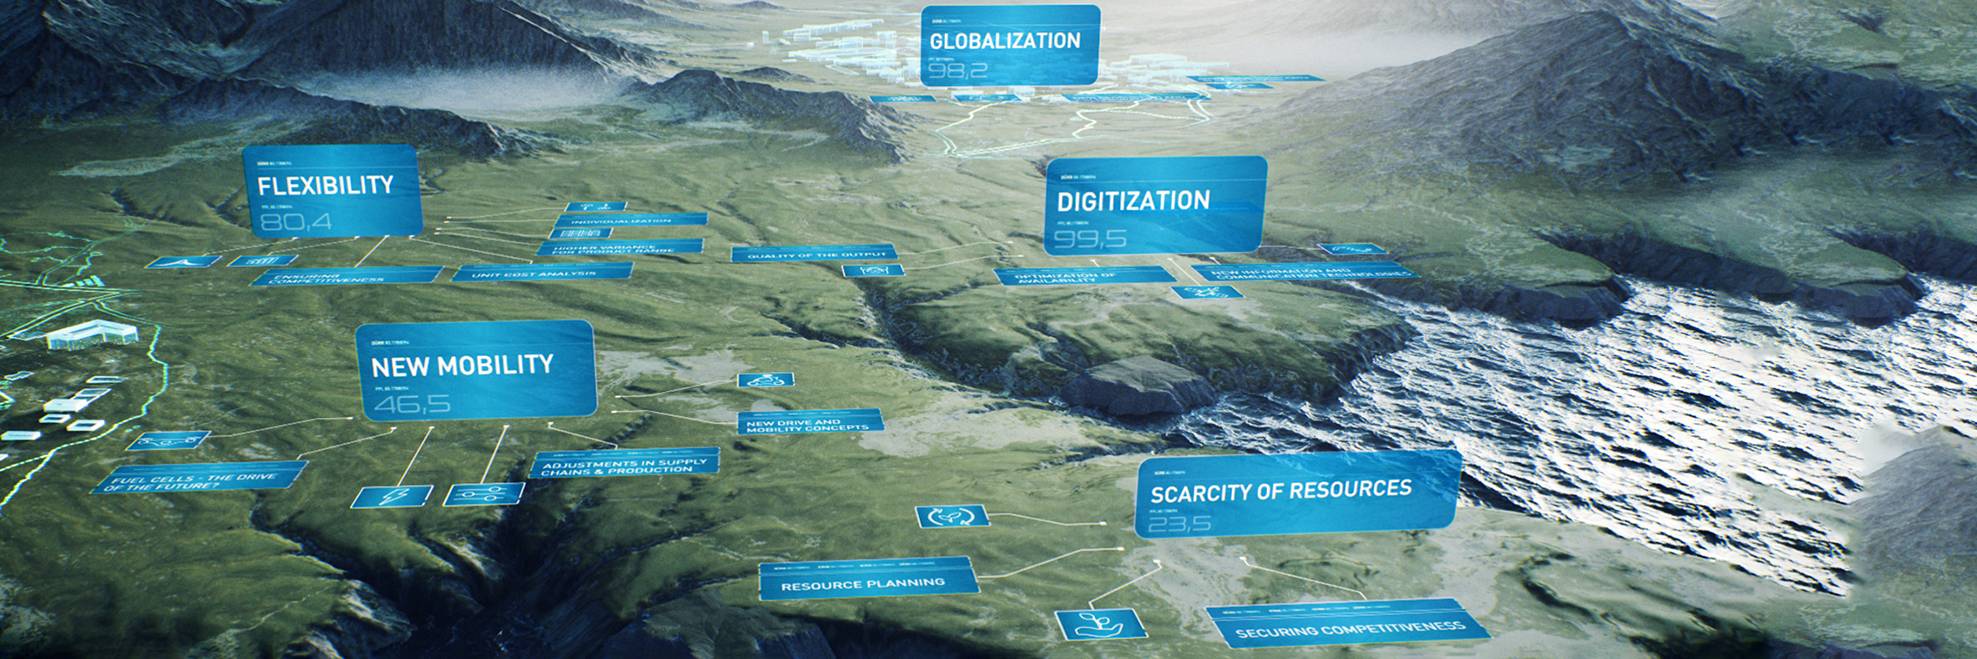 Dürr conRocky landscape, megatrends in the creation of a factory are depicted on signs. These must be taken into account to ensure sustainable and flexible produ